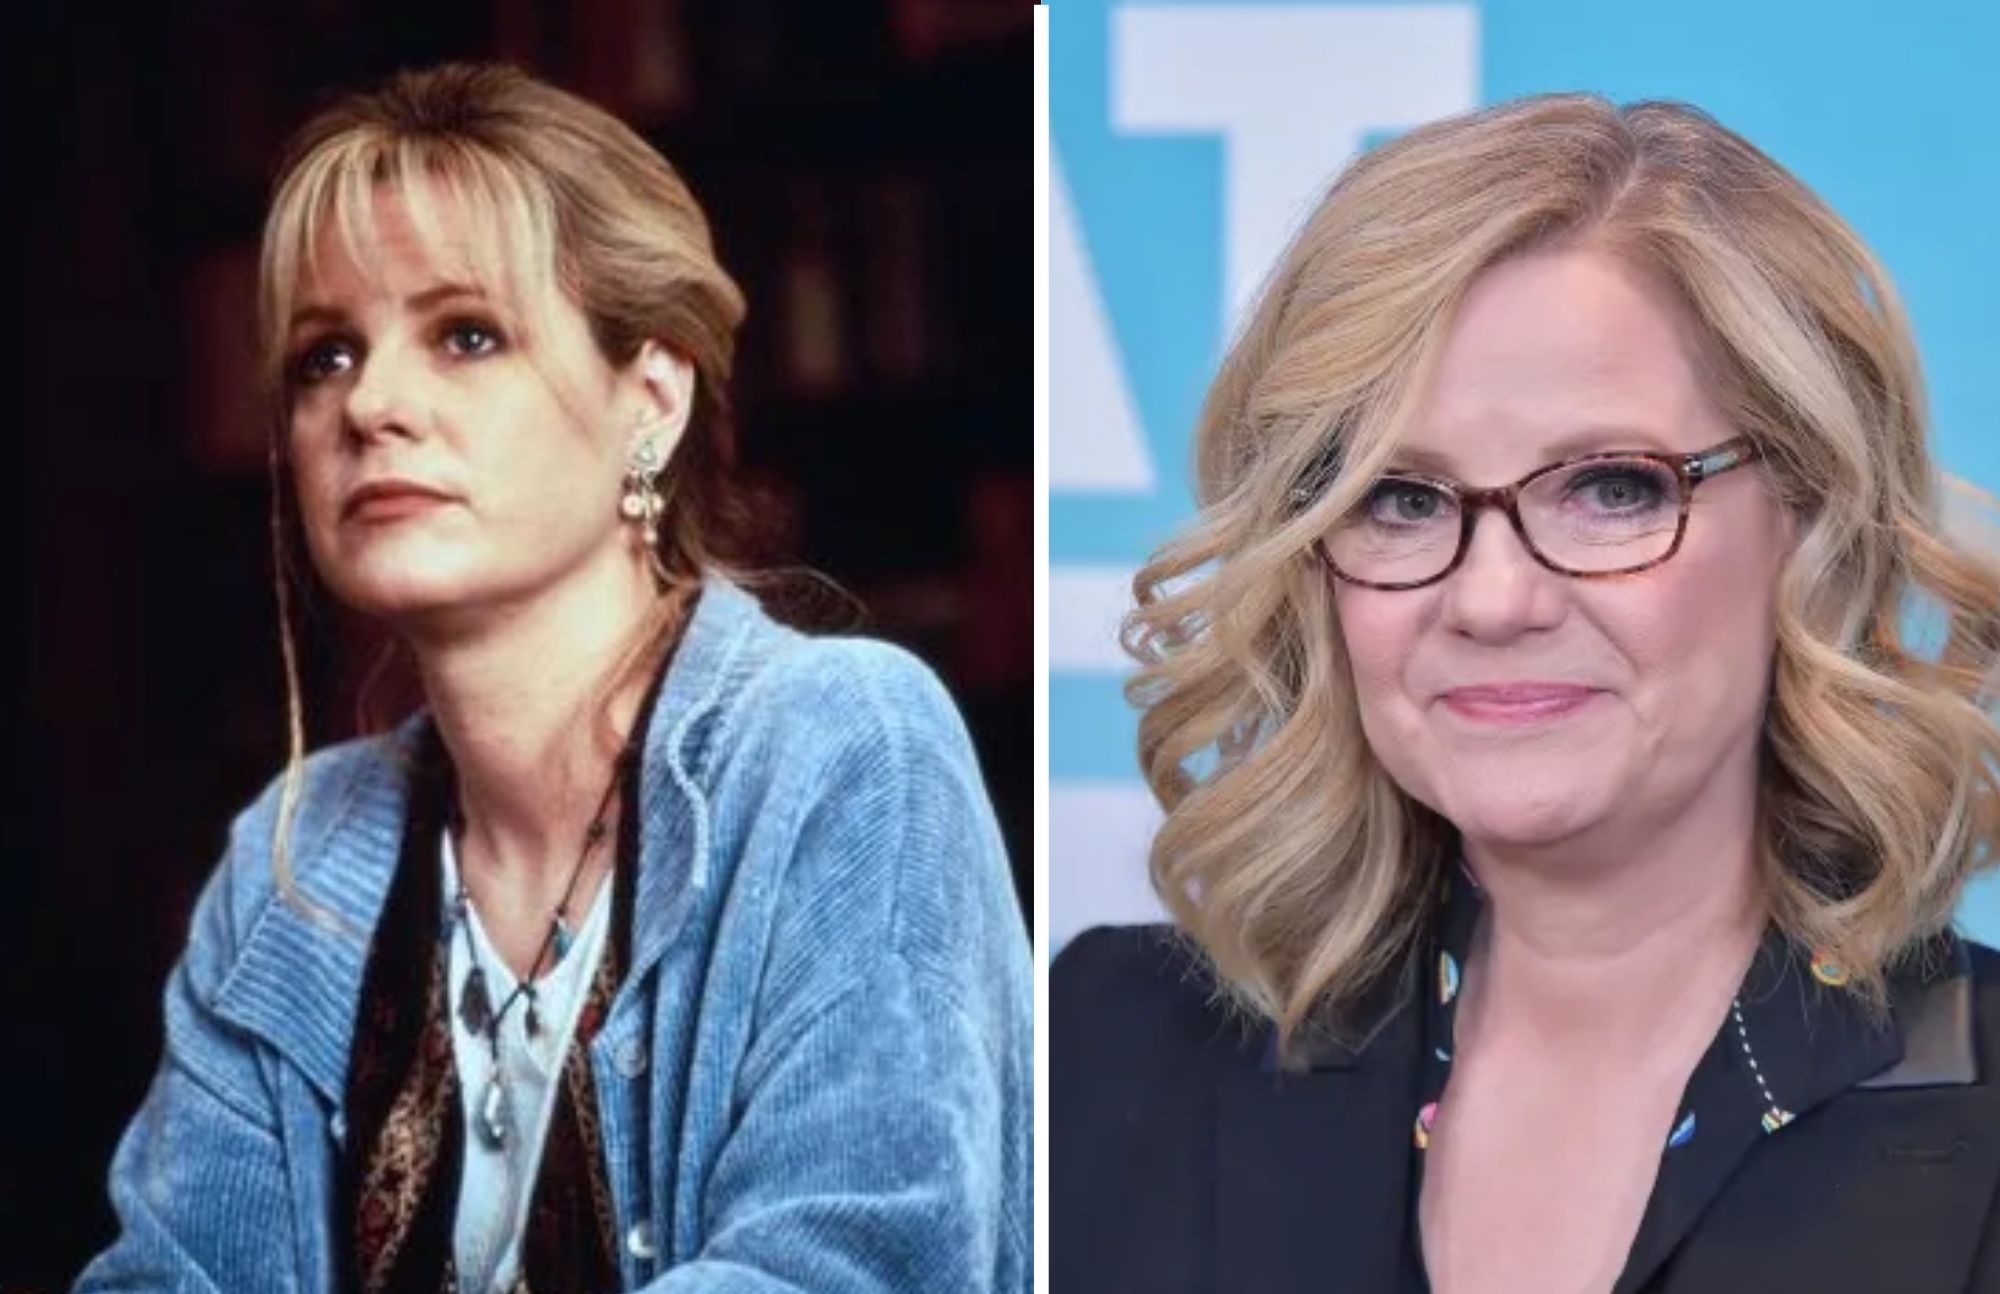 Sarah Whittle is played by Bonnie Hunt, who wears glasses and has blonde hair